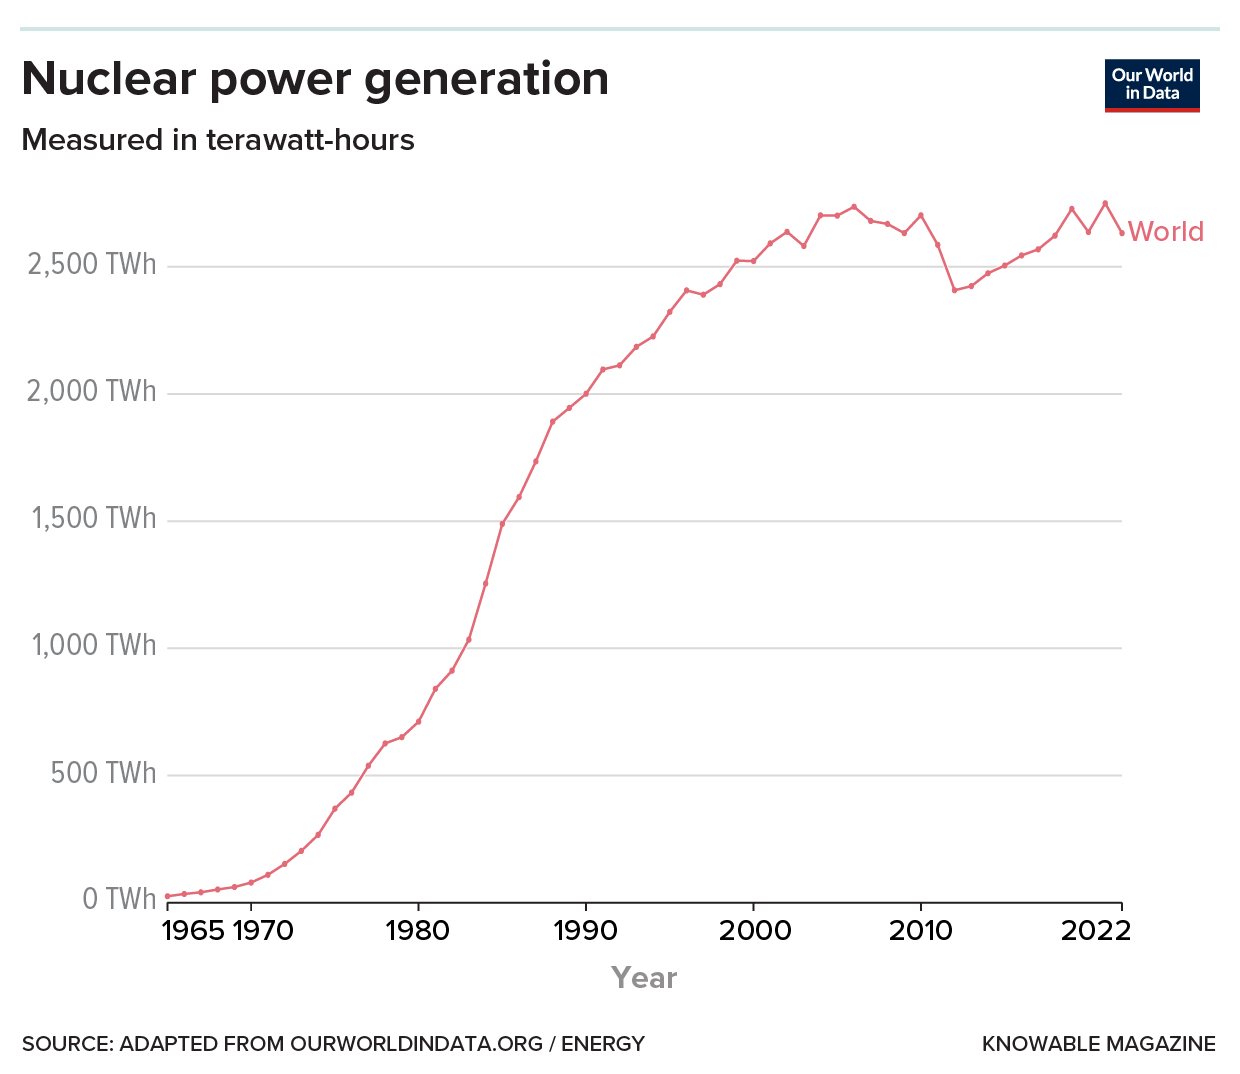 Graph showing nuclear power generation by year from 1965 to 2022.